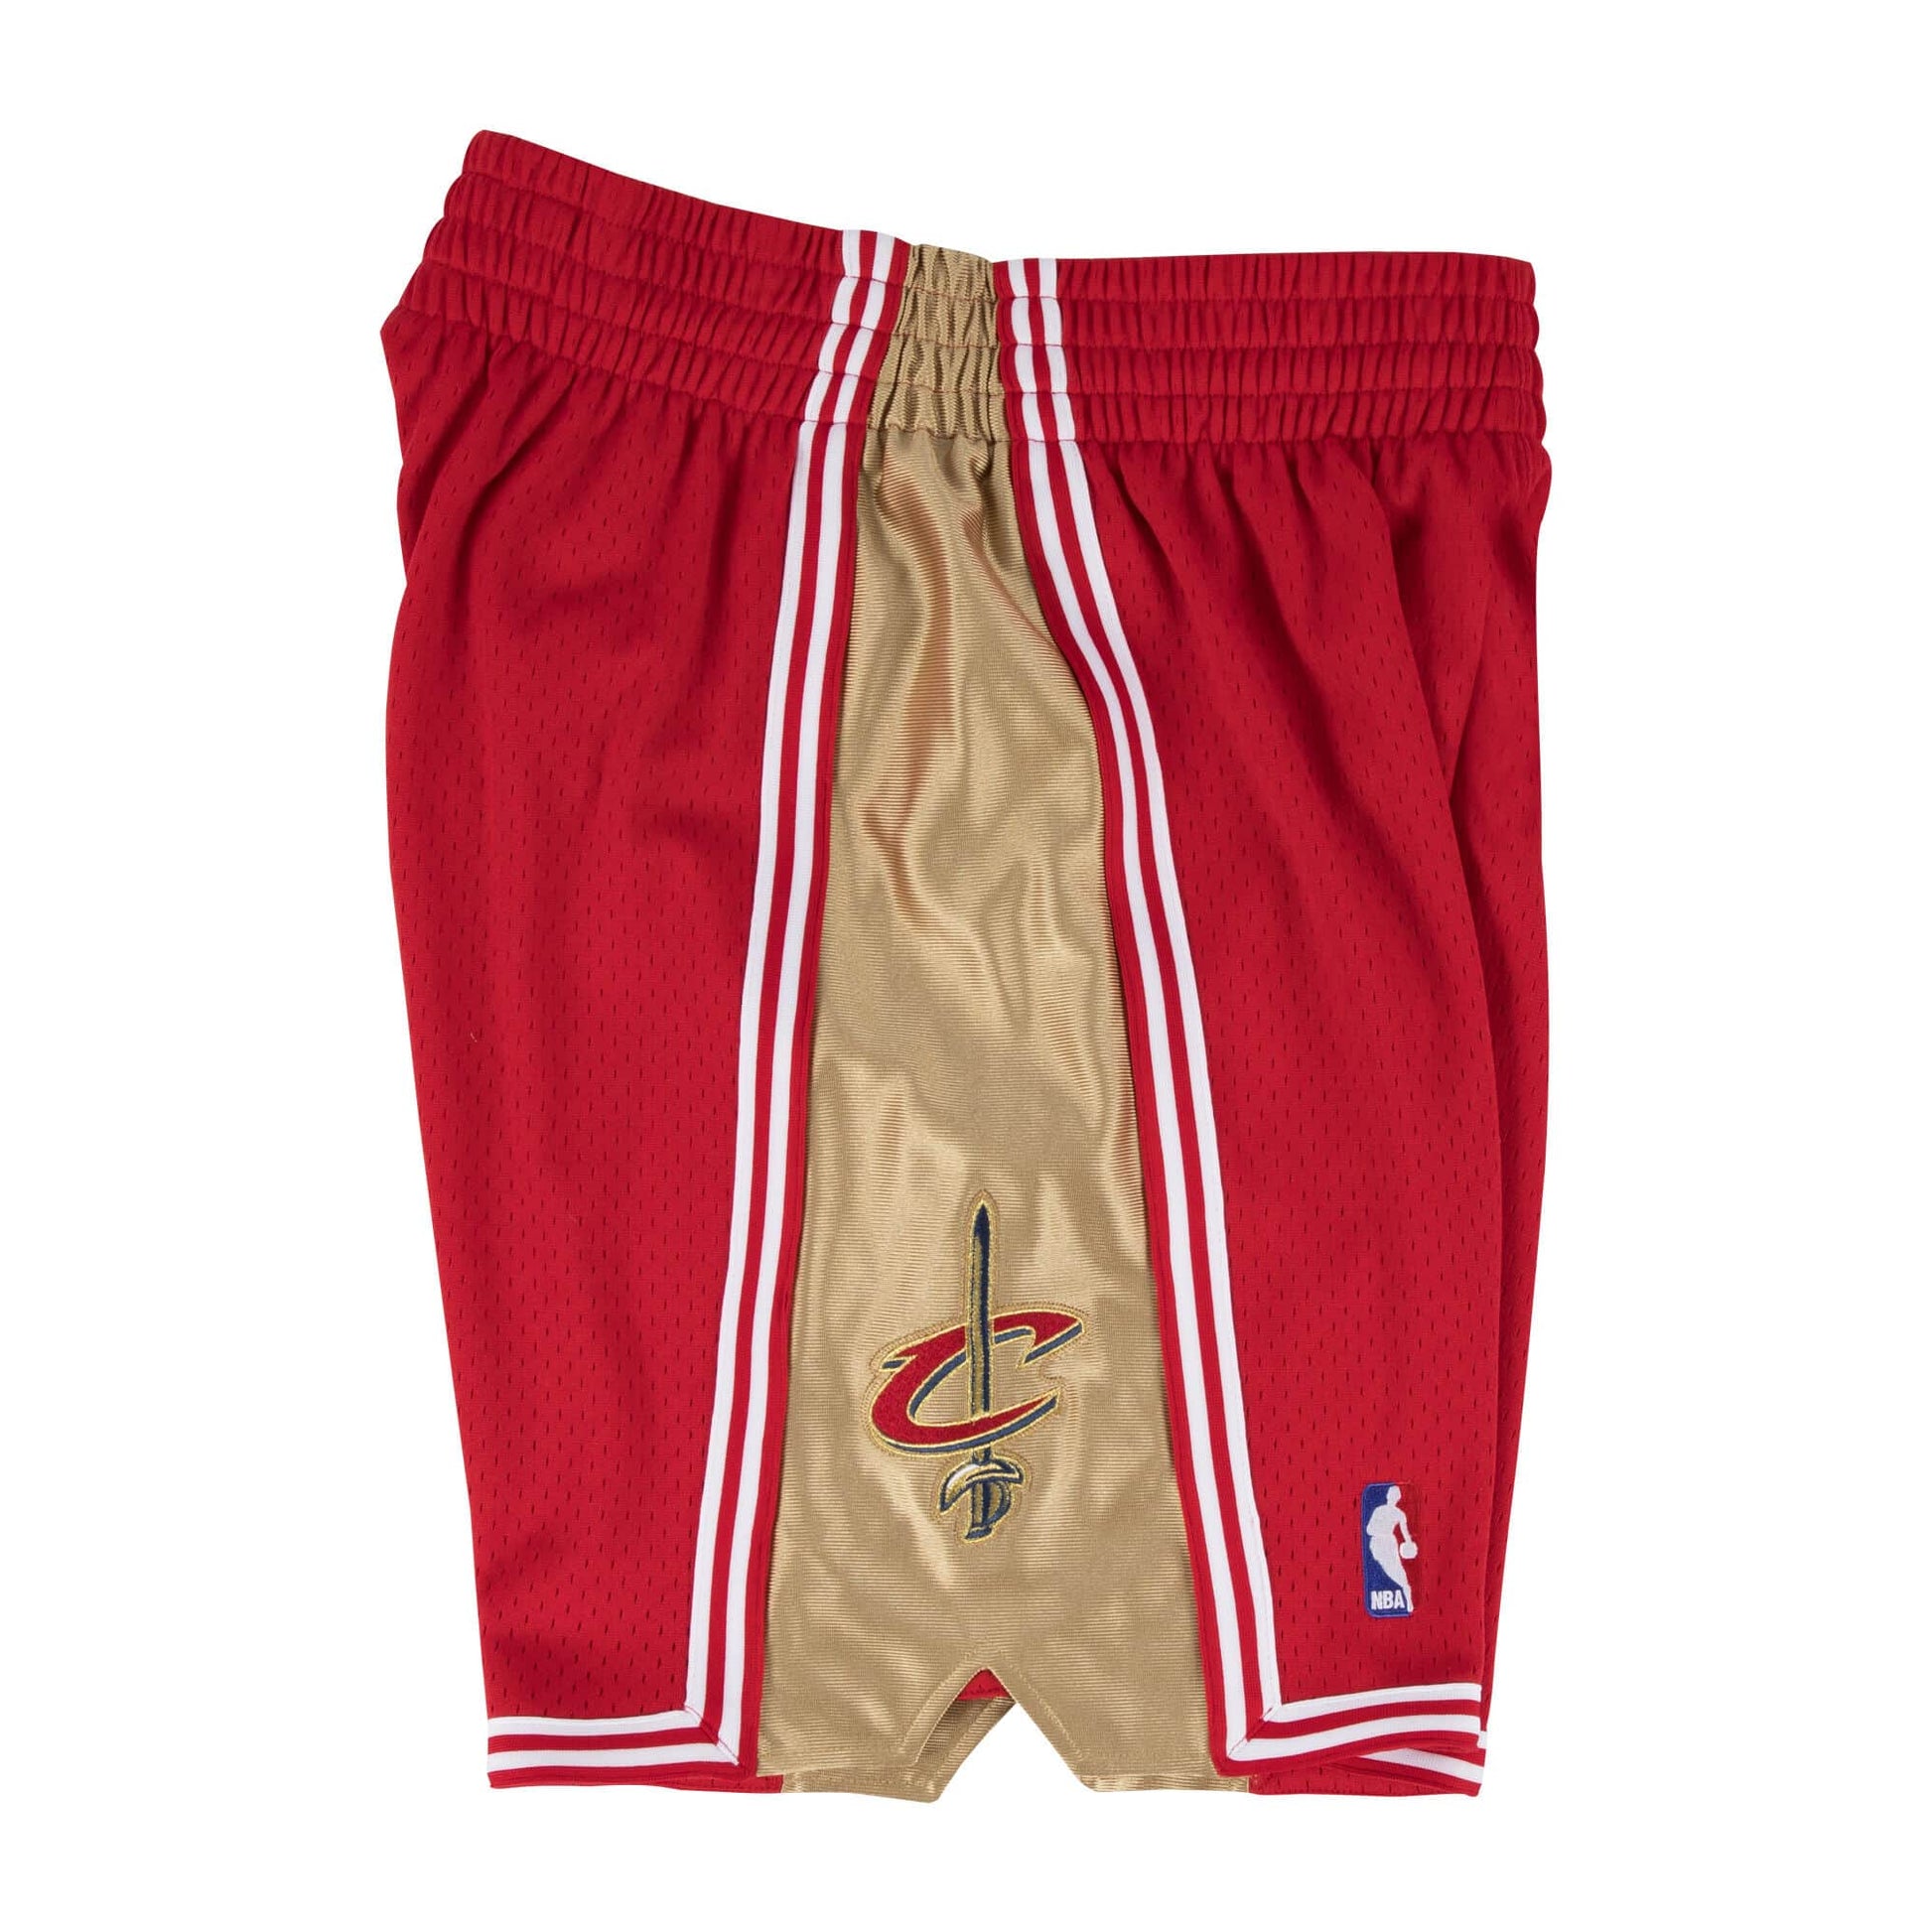 NBA Authentic Shorts from Mitchell & Ness Mitchell & Ness